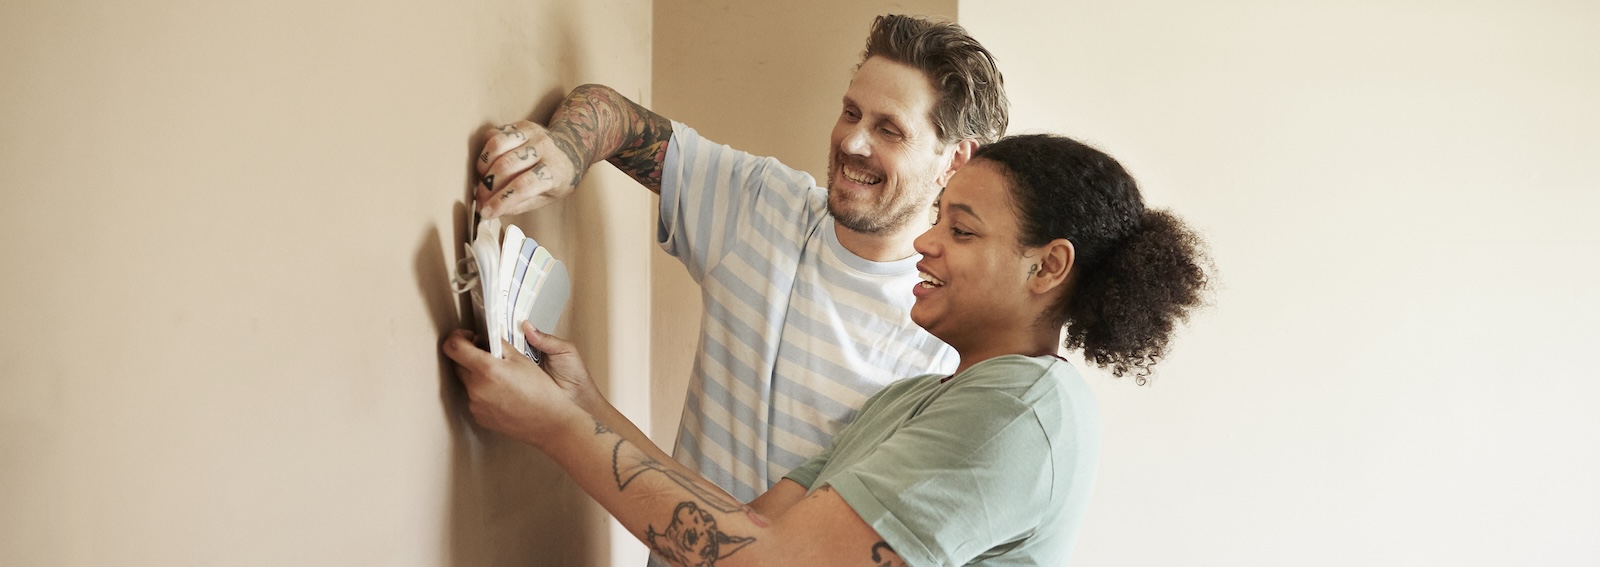 Smiling couple choosing paint color for home